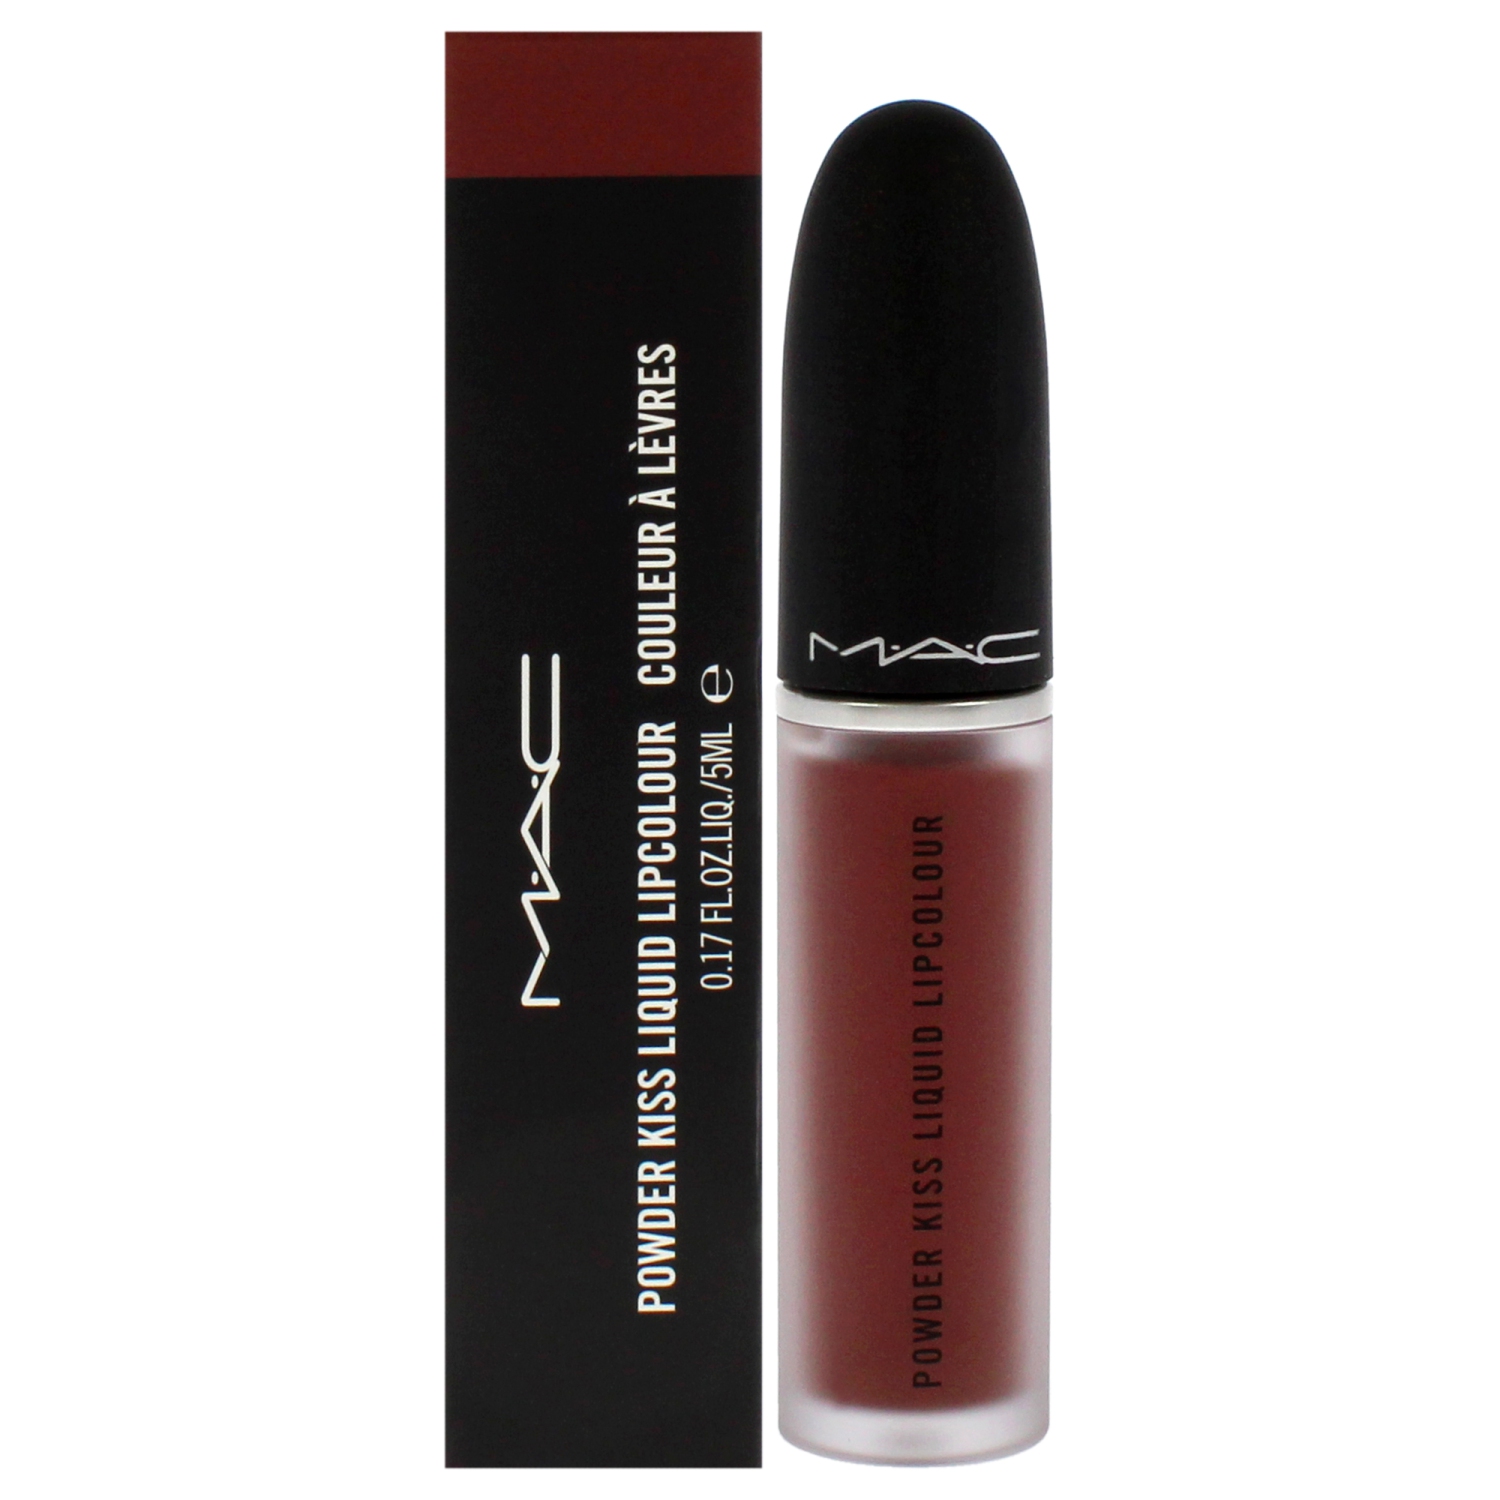 Powder Kiss Liquid Lipcolor - 997 Over The Taupe by MAC for Women - 0.17 oz Lipstick